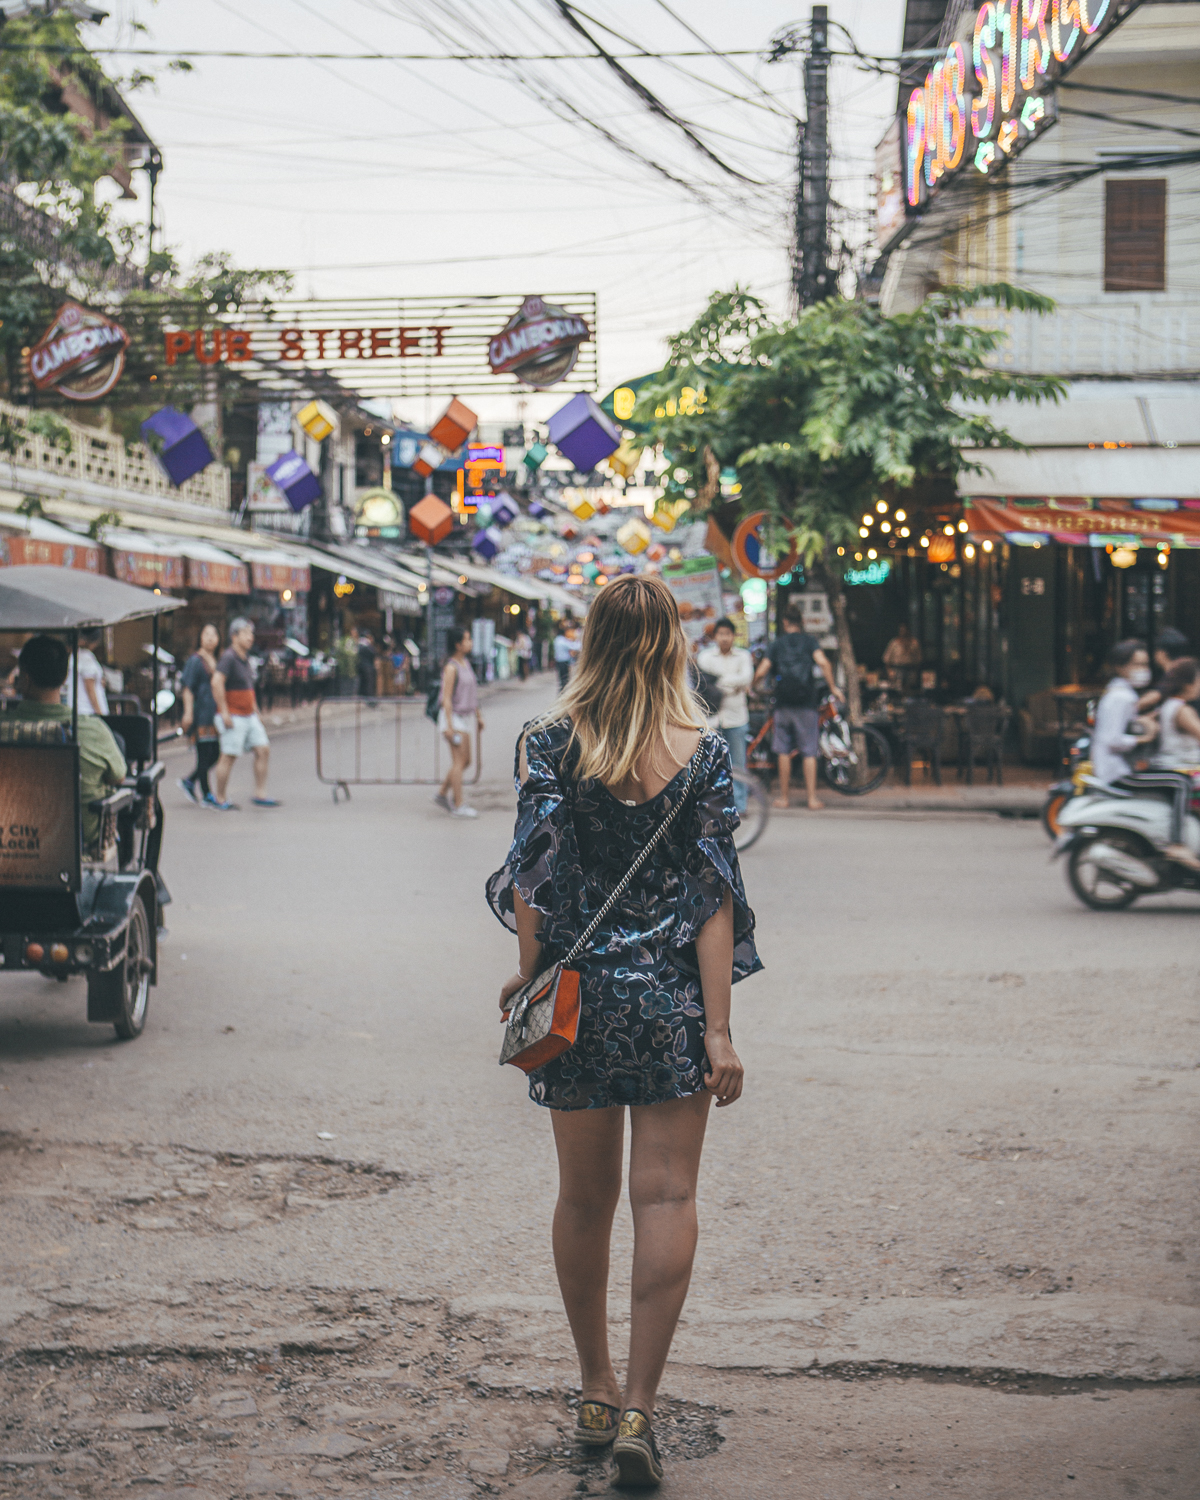 Pub-Street-2 Top 3 things to do in Siem Reap